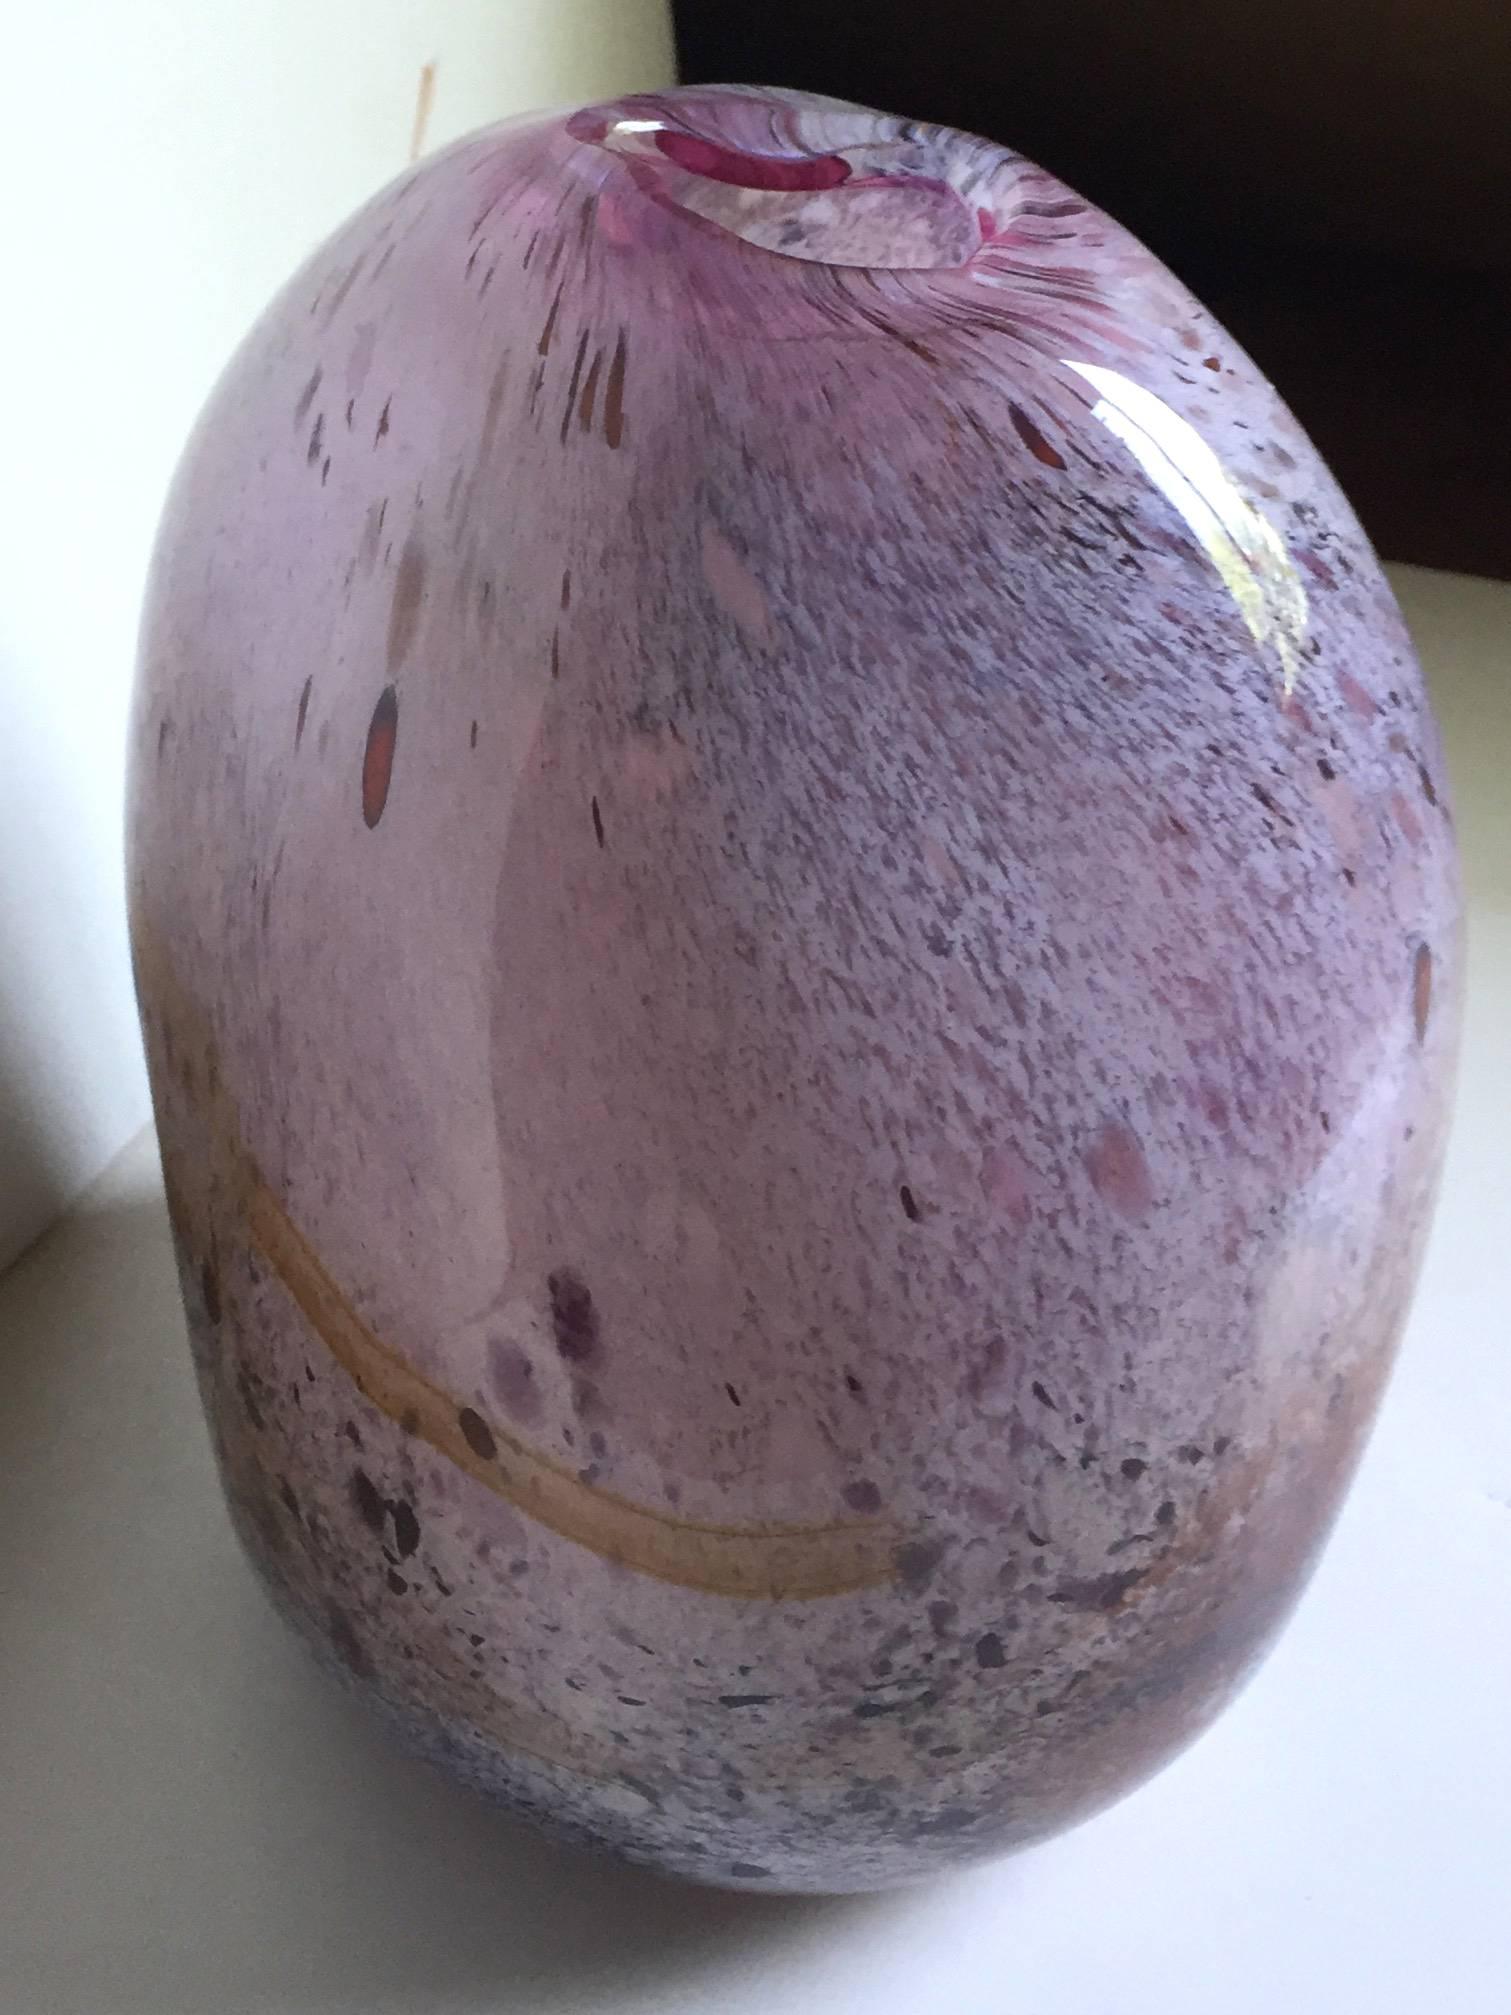 Fine contemporary studio blown glass vase of organic ovoidal form, with dynamic whirling flecks of brown, rust and yellow in the body, with uncurvate mouth, circa 1990.

Indistinct signature to base. From a Mid-Western private